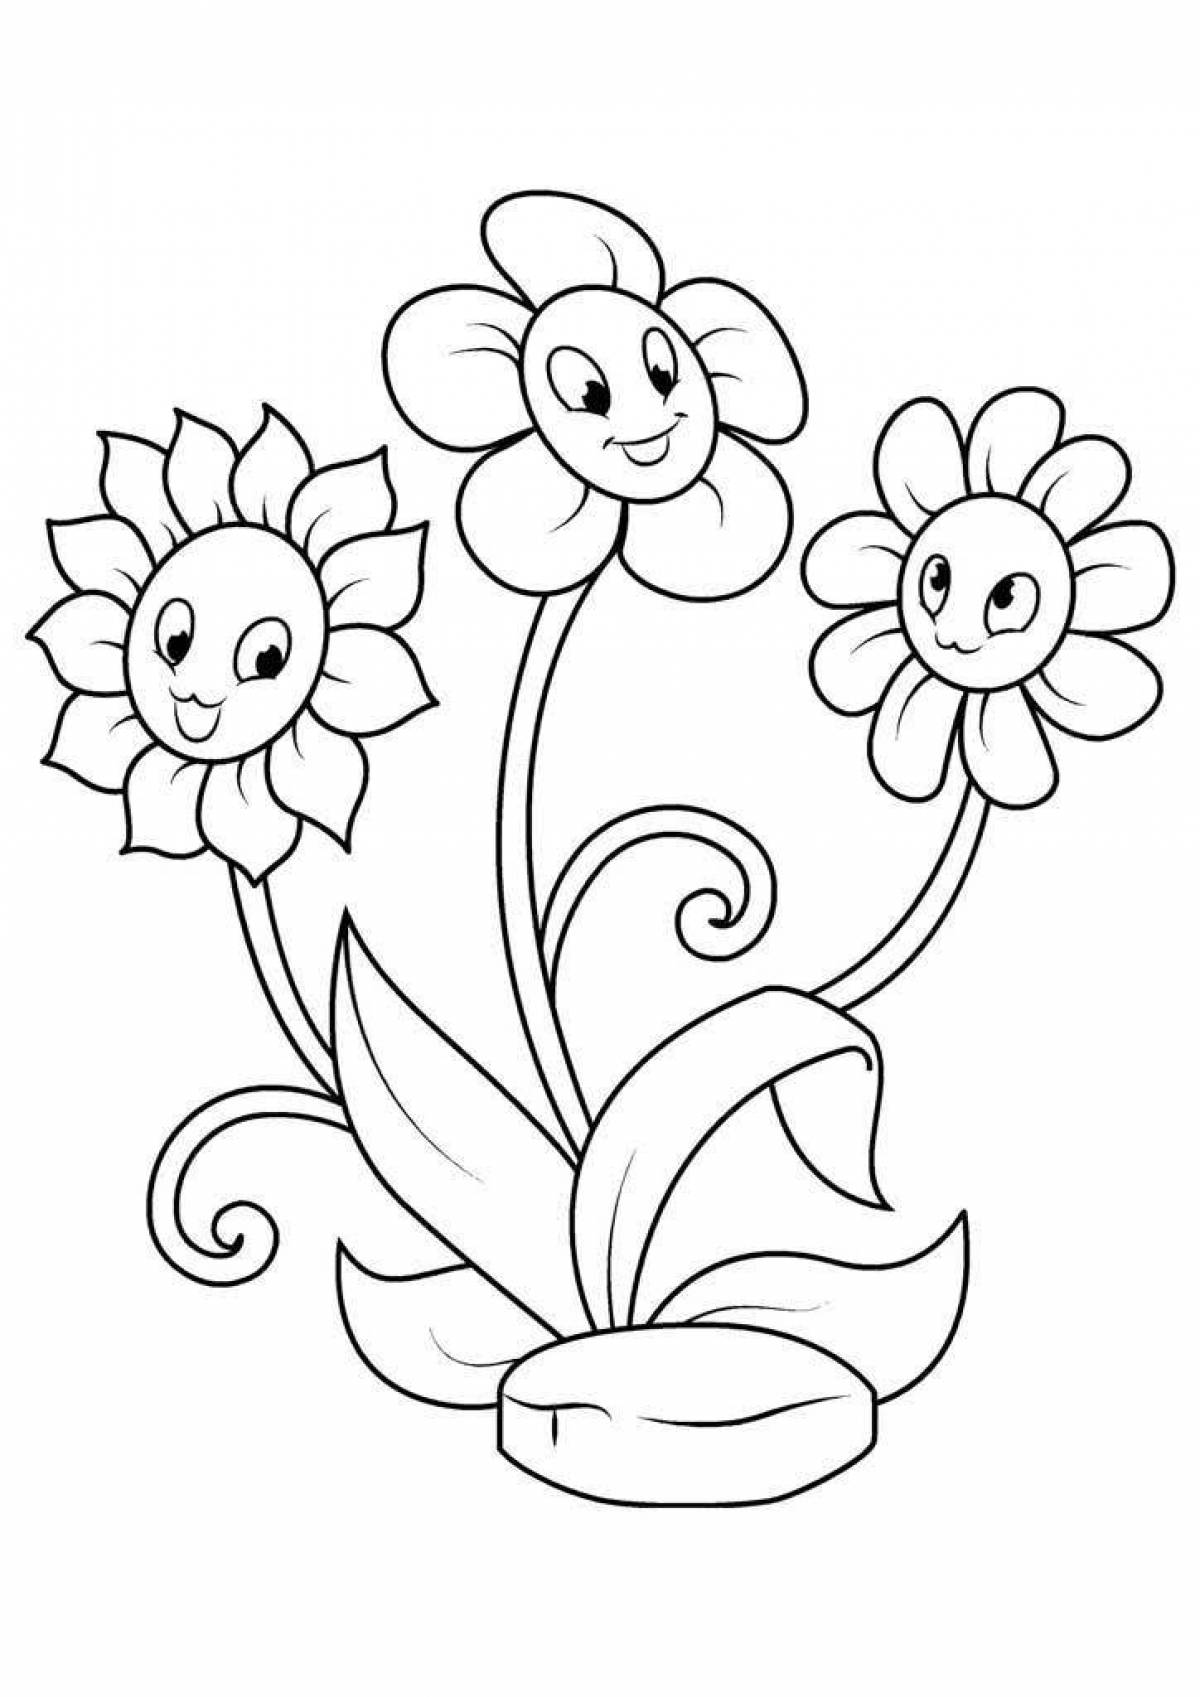 Adorable plant coloring page for kids